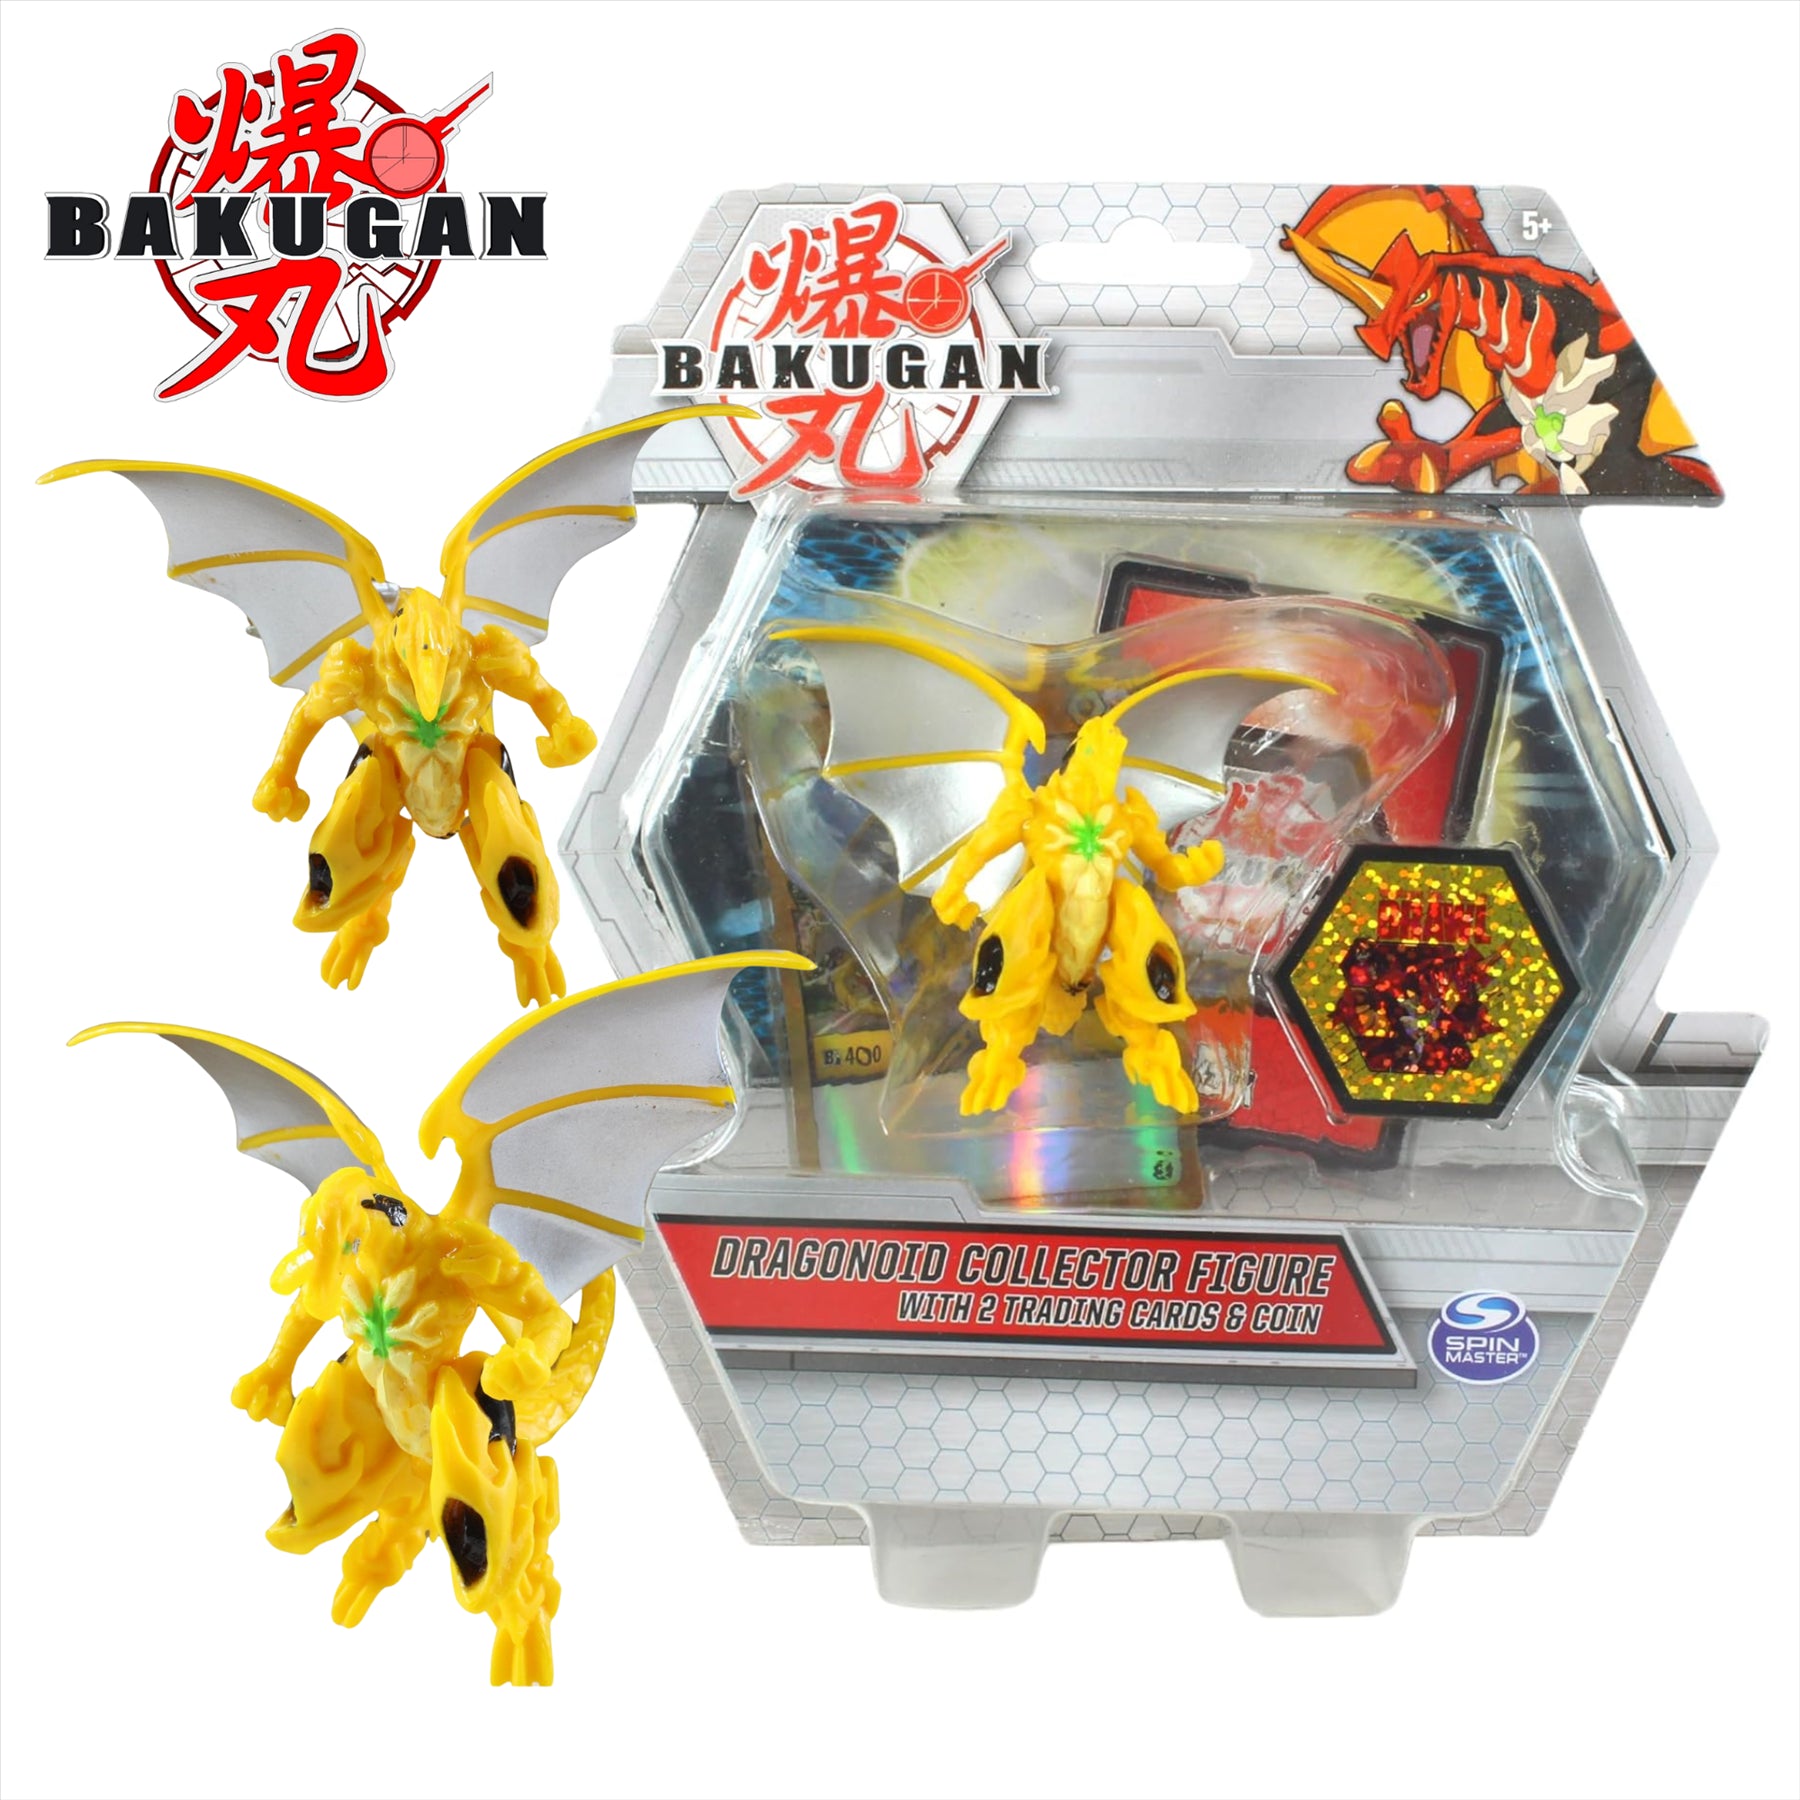 BAKUGAN - Dragonoid Yellow Collector Figure With 2 Trading Cards & Collectors Coin - Toptoys2u